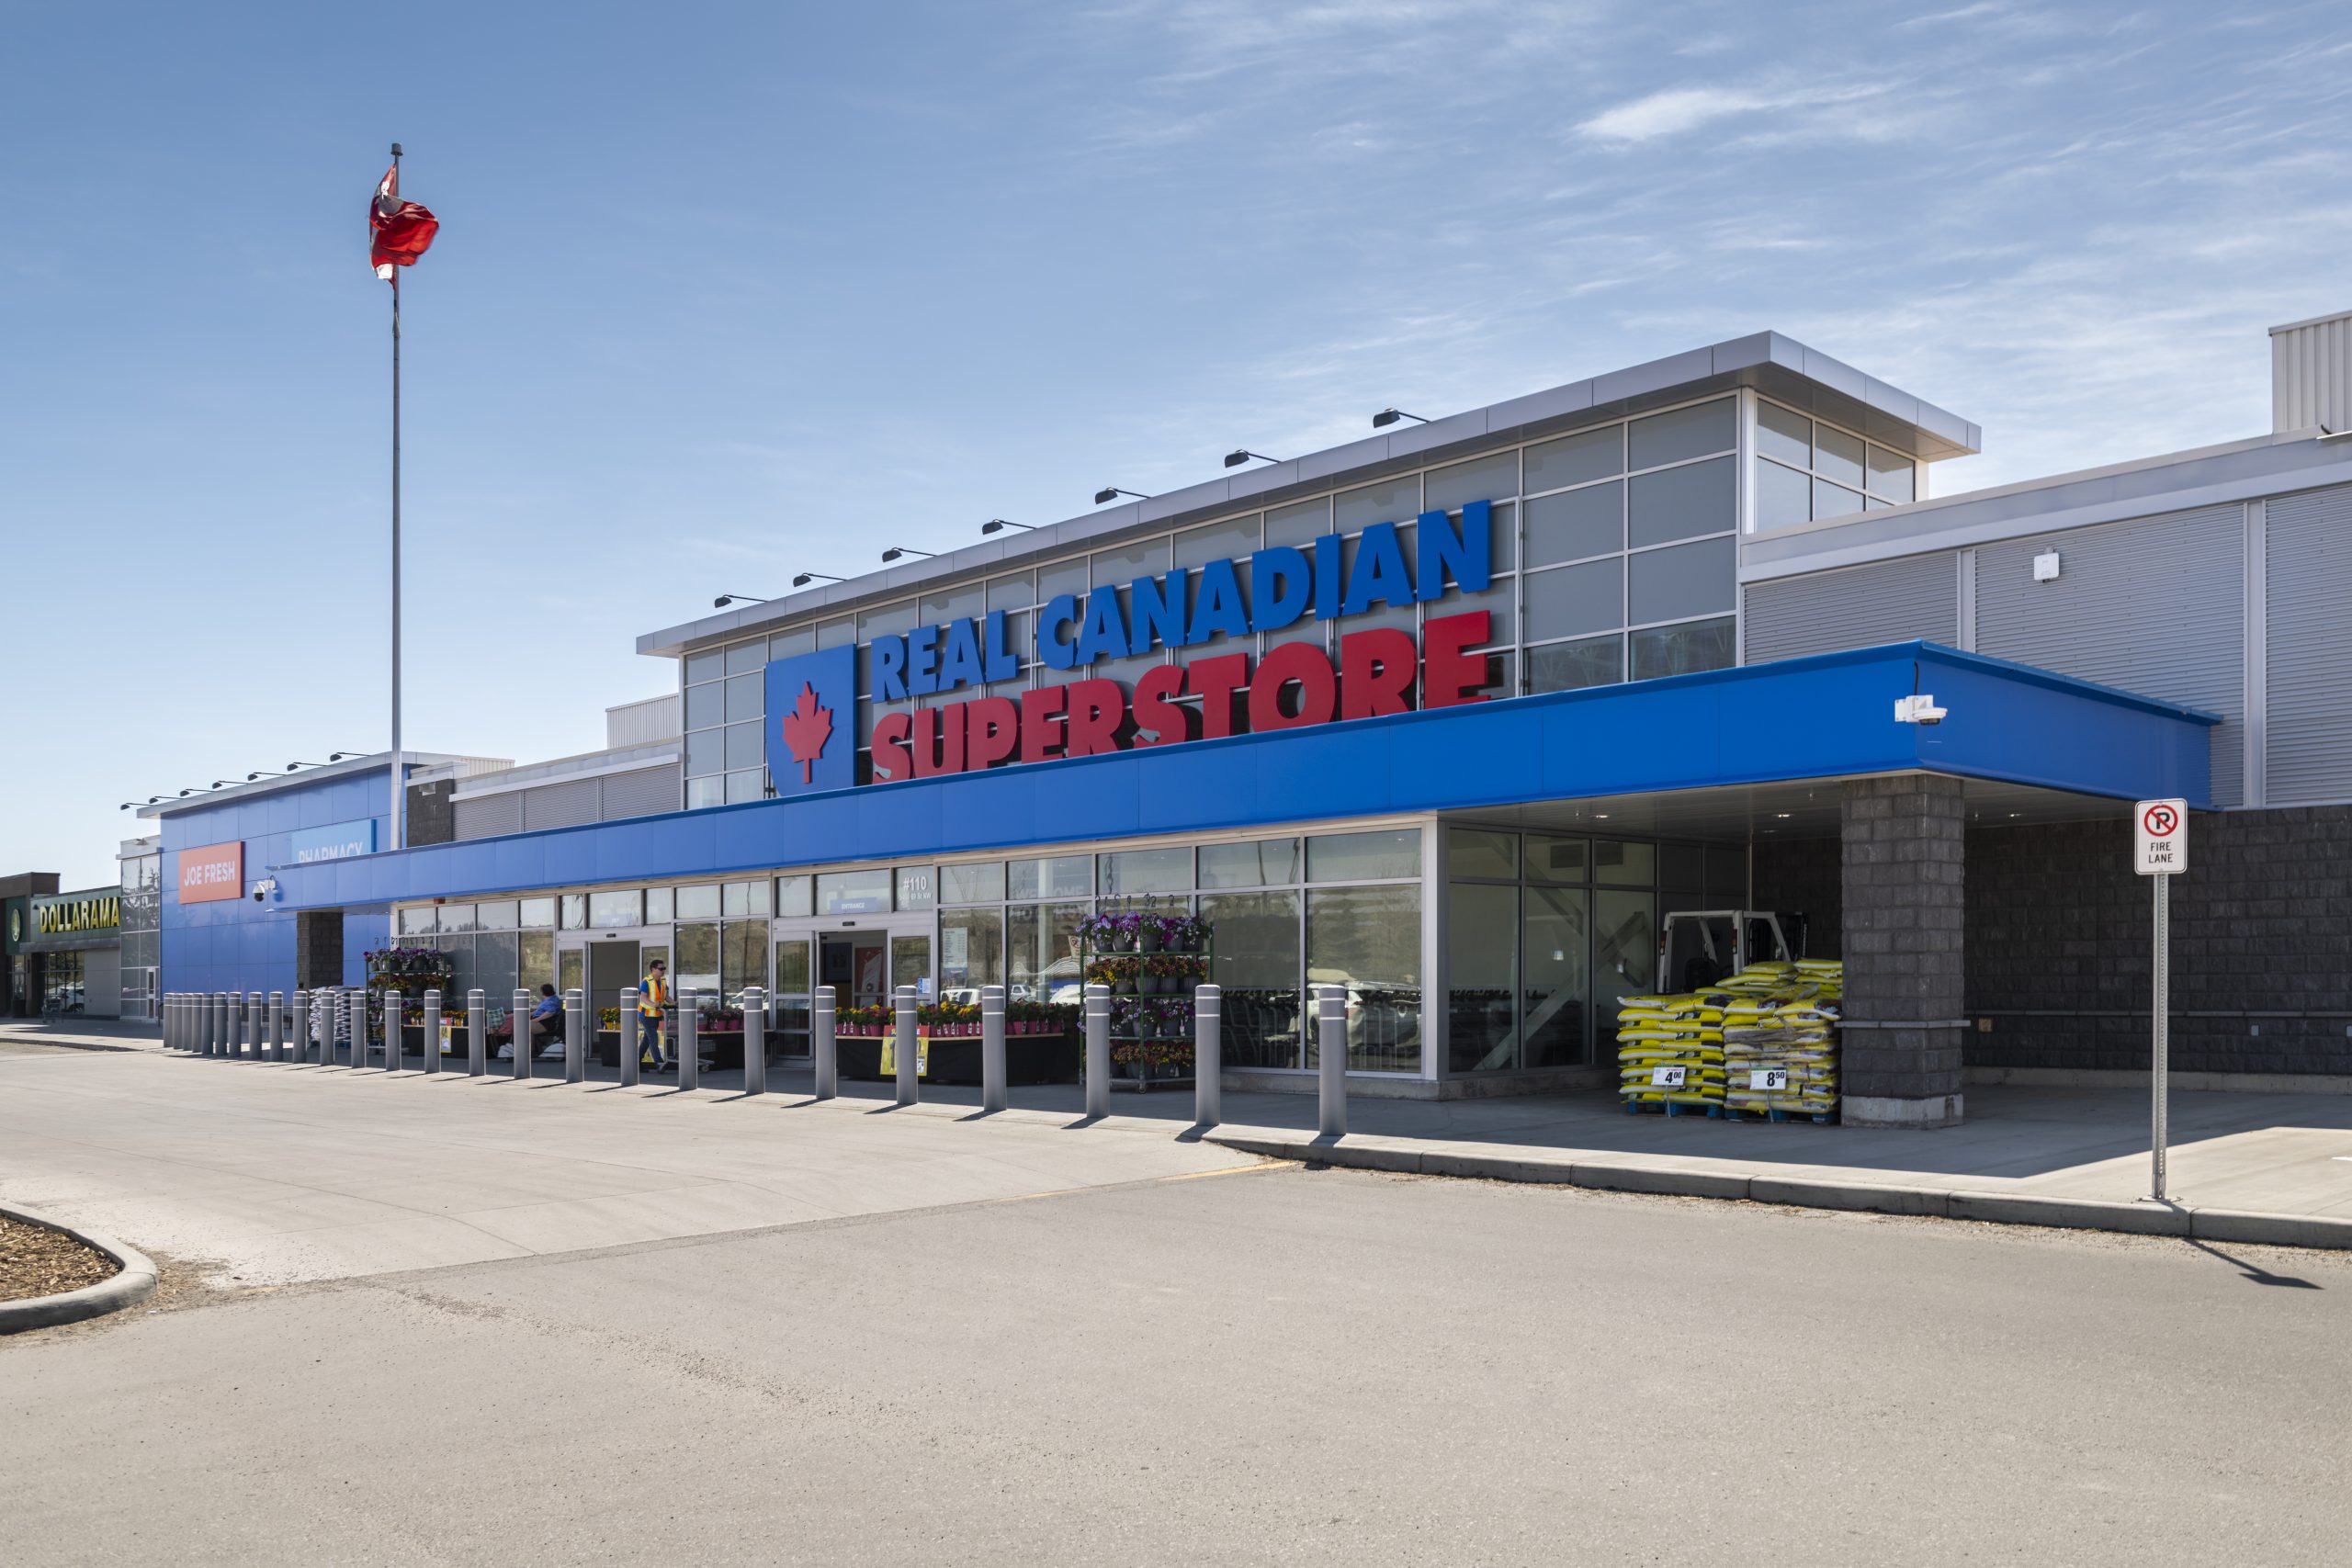 Real Canadian Superstore – Nursery, AB